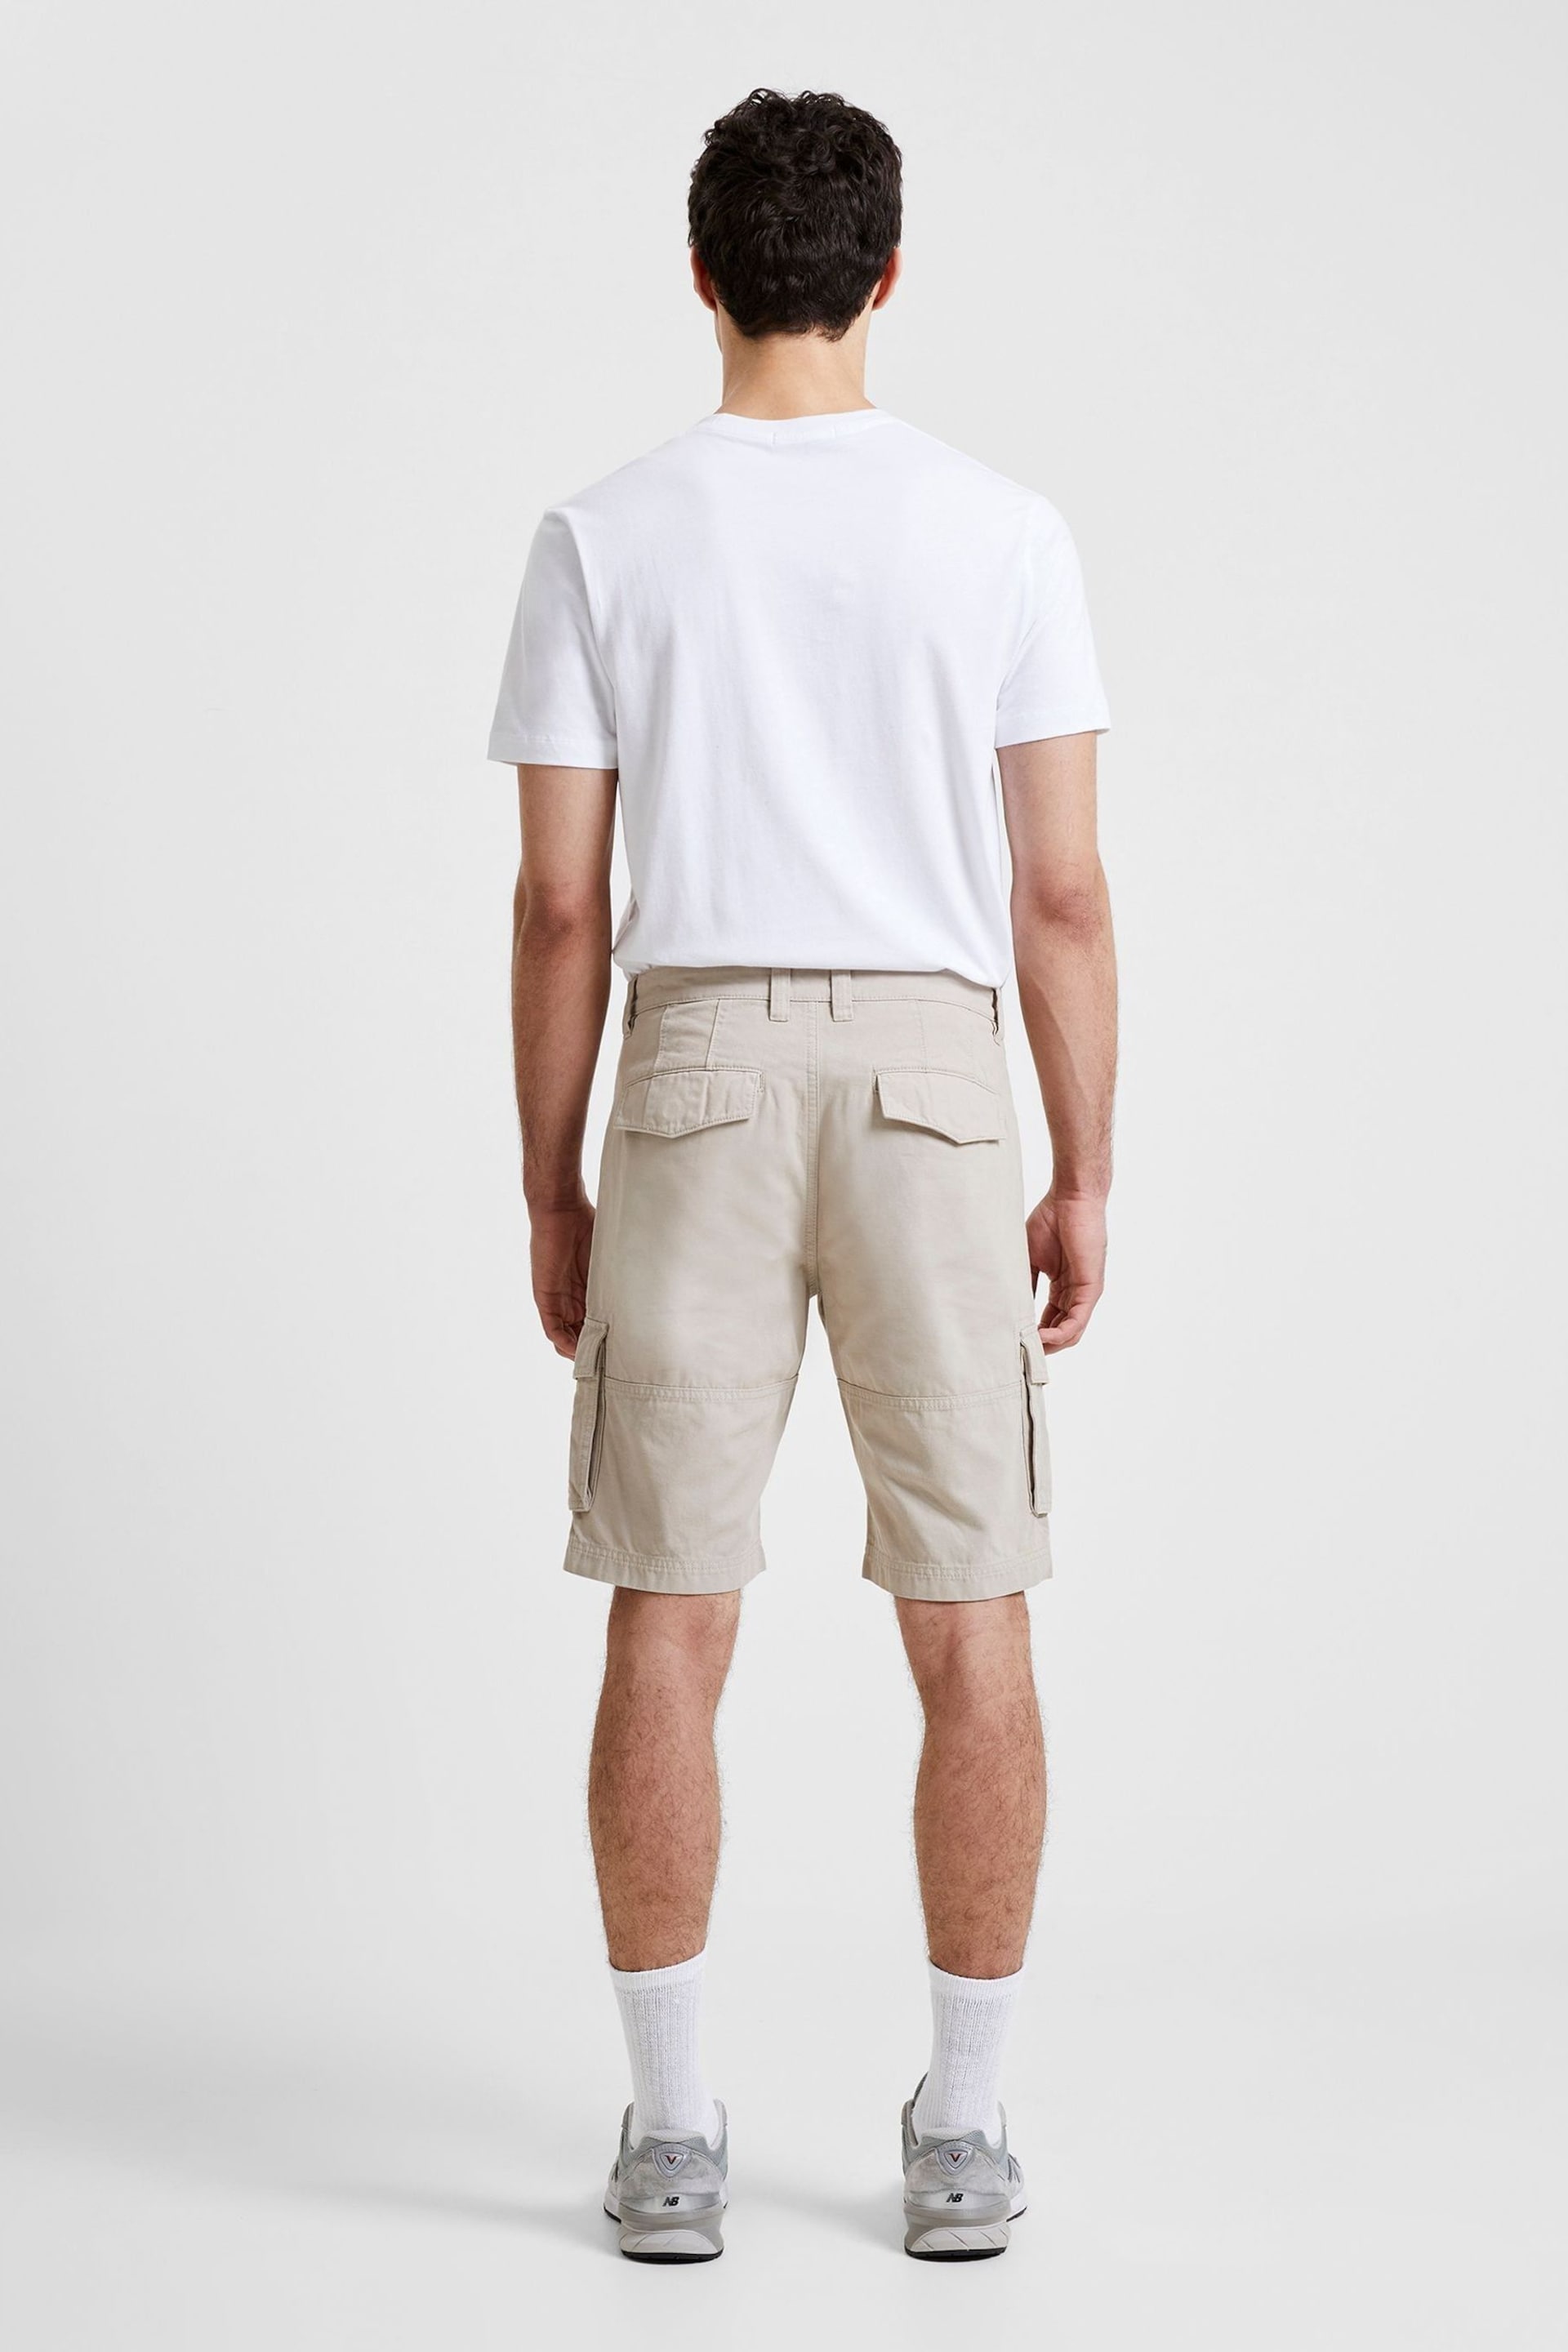 French Connection Moonstruck Cargo Shorts - Image 2 of 2